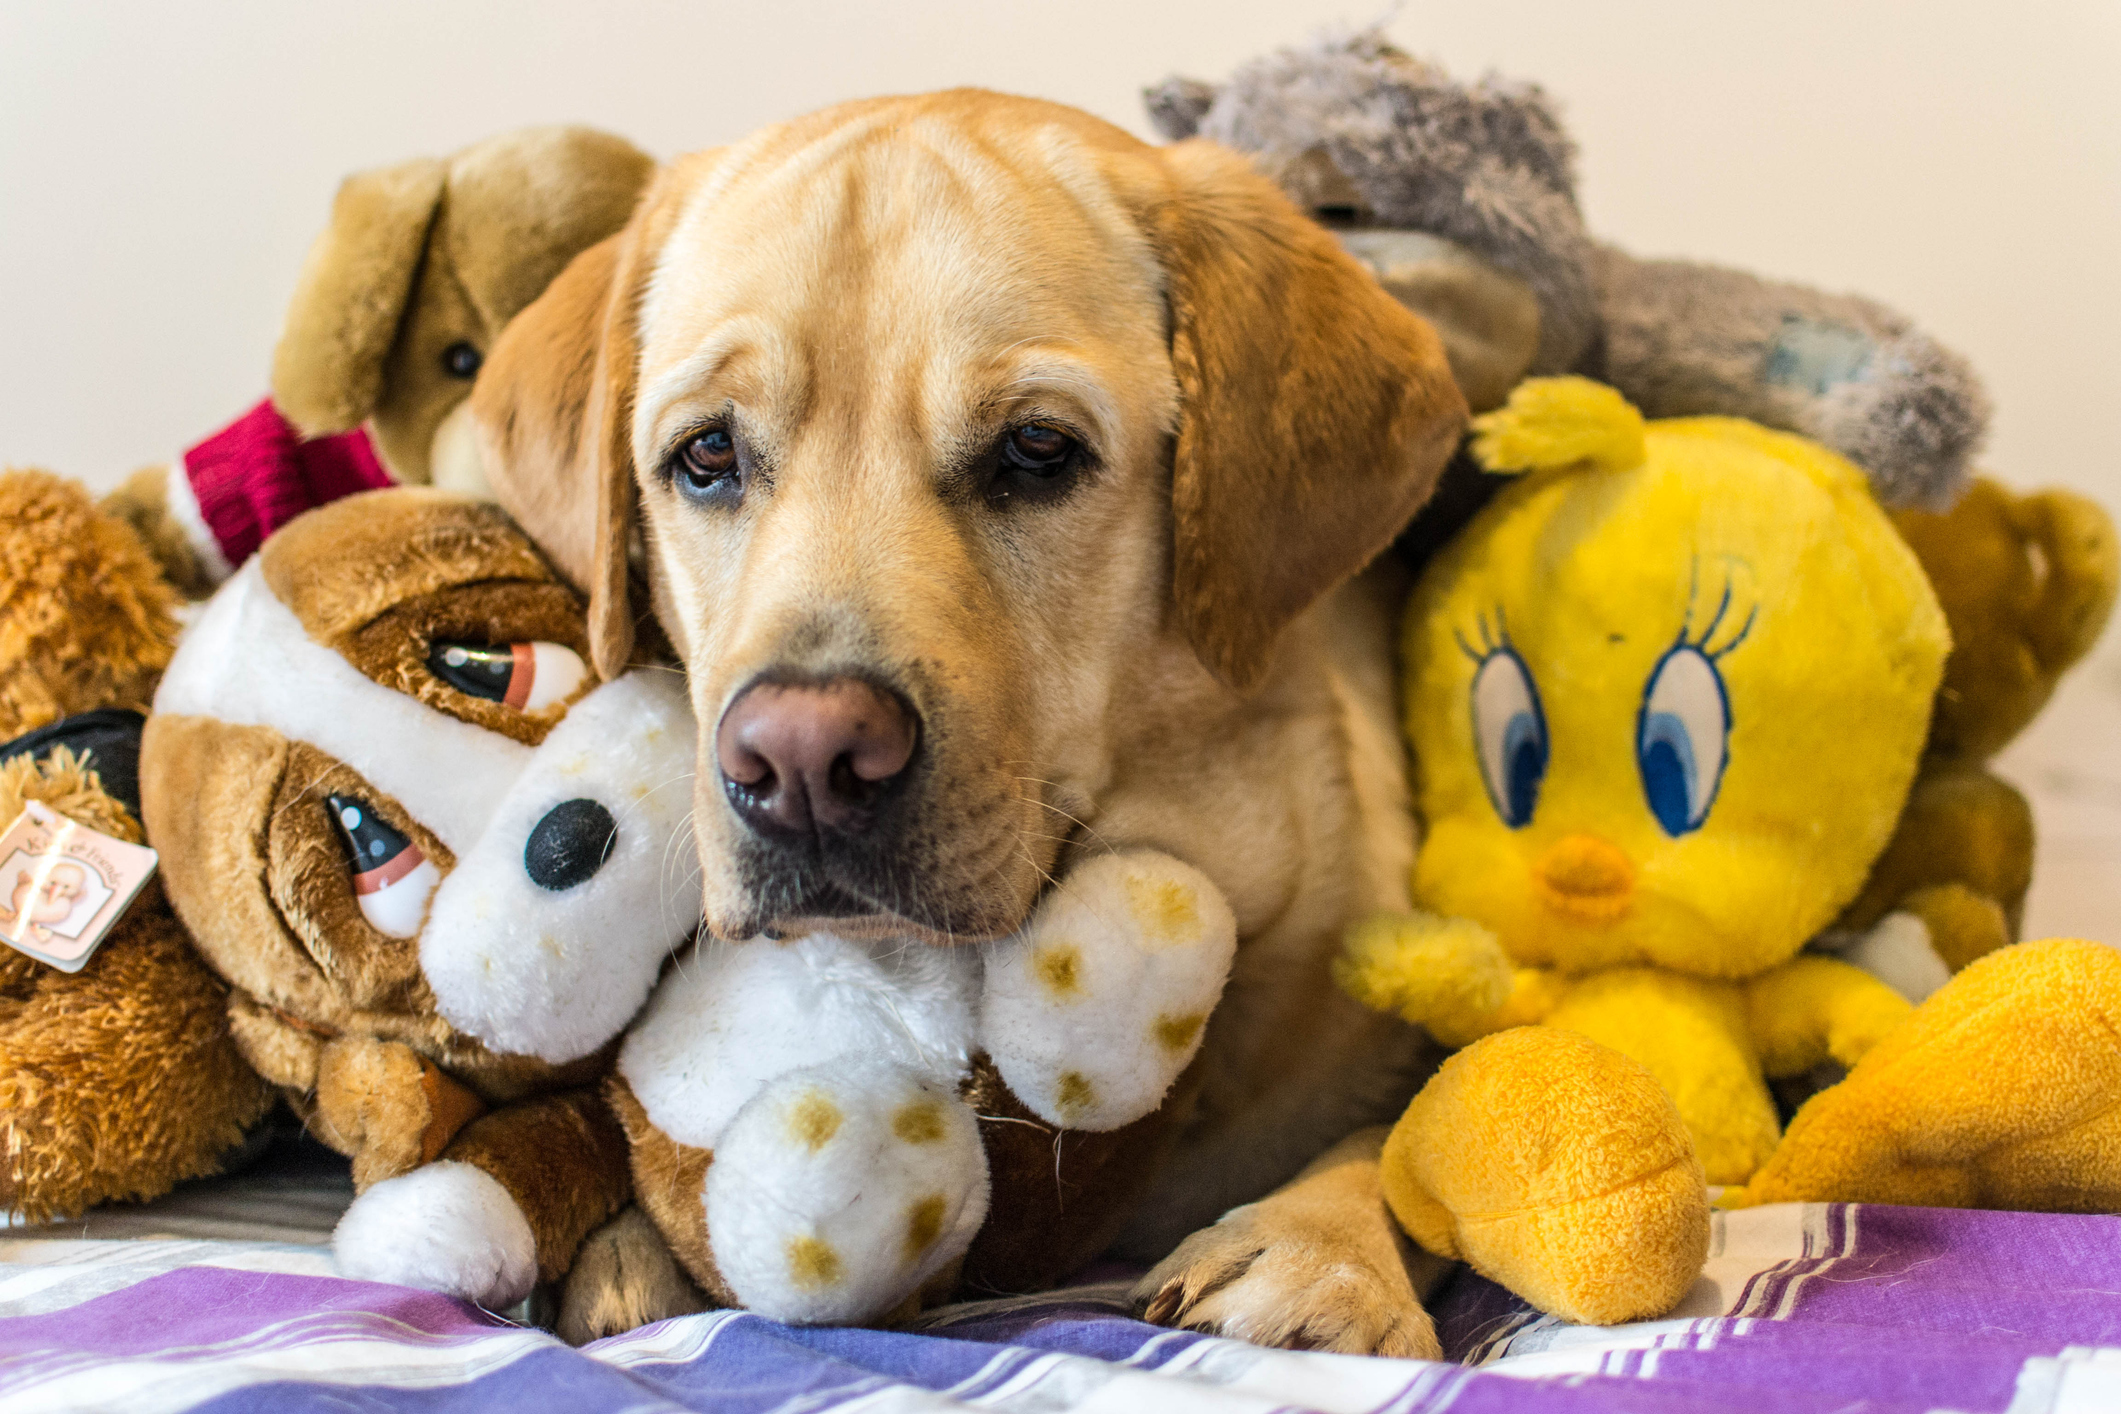 Yellow labrador hiding in a pile of stuffed toys